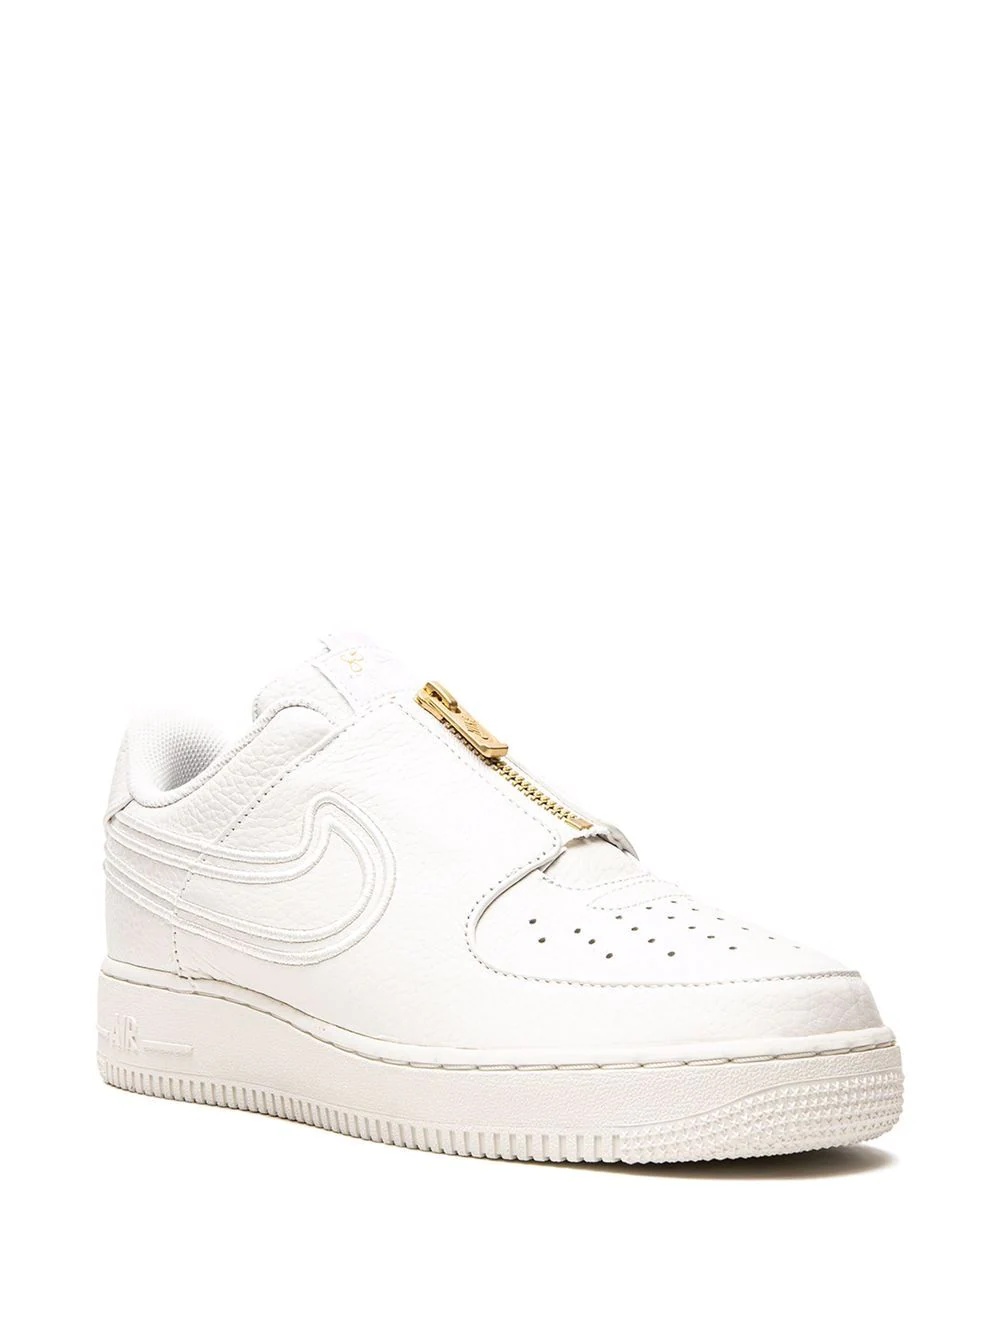 x Serena Williams Air Force 1 Low LXX sneakers - 2